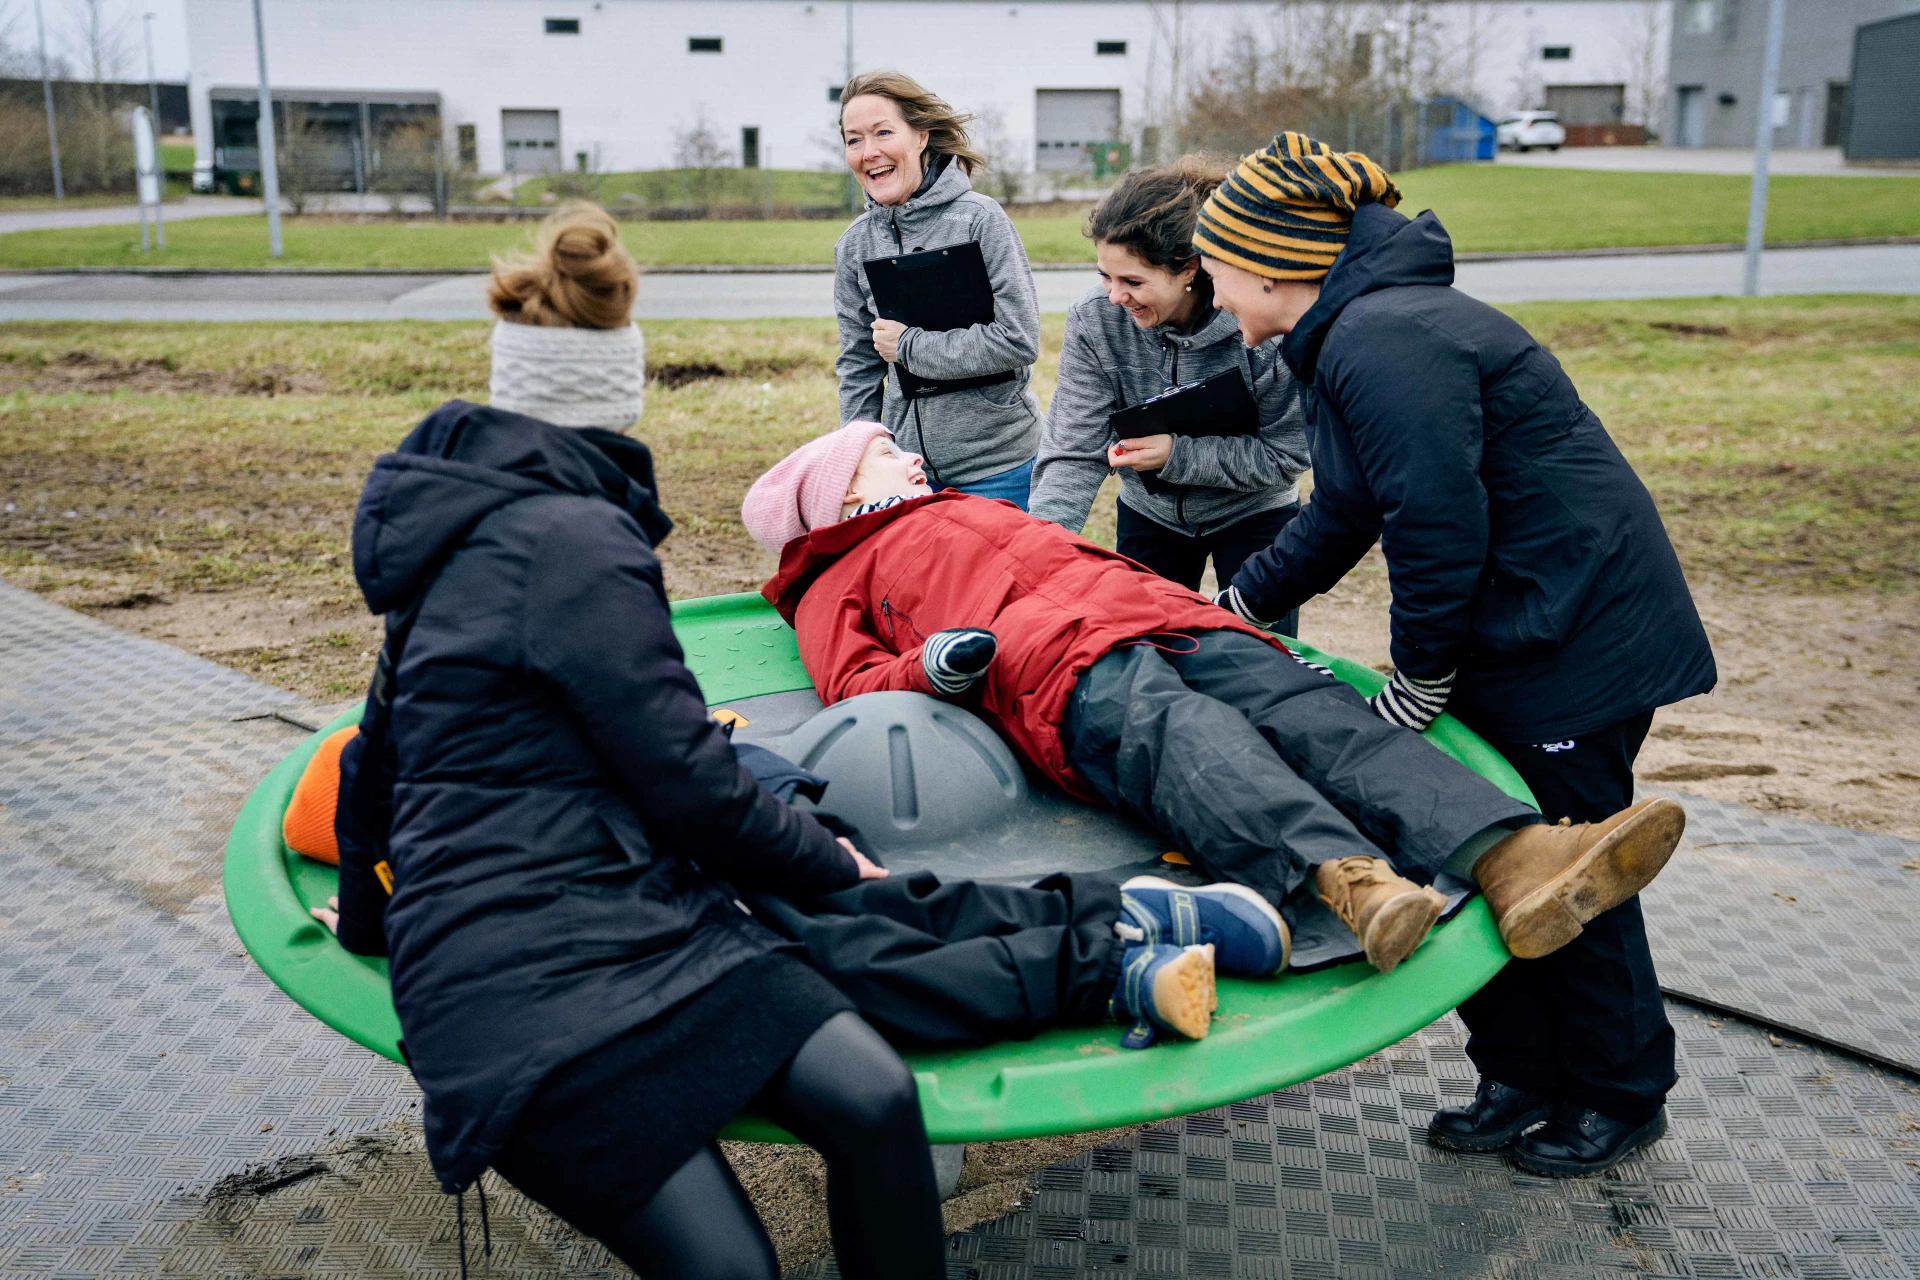 a group of people standing around a children laying on top of a inclusive play equipment